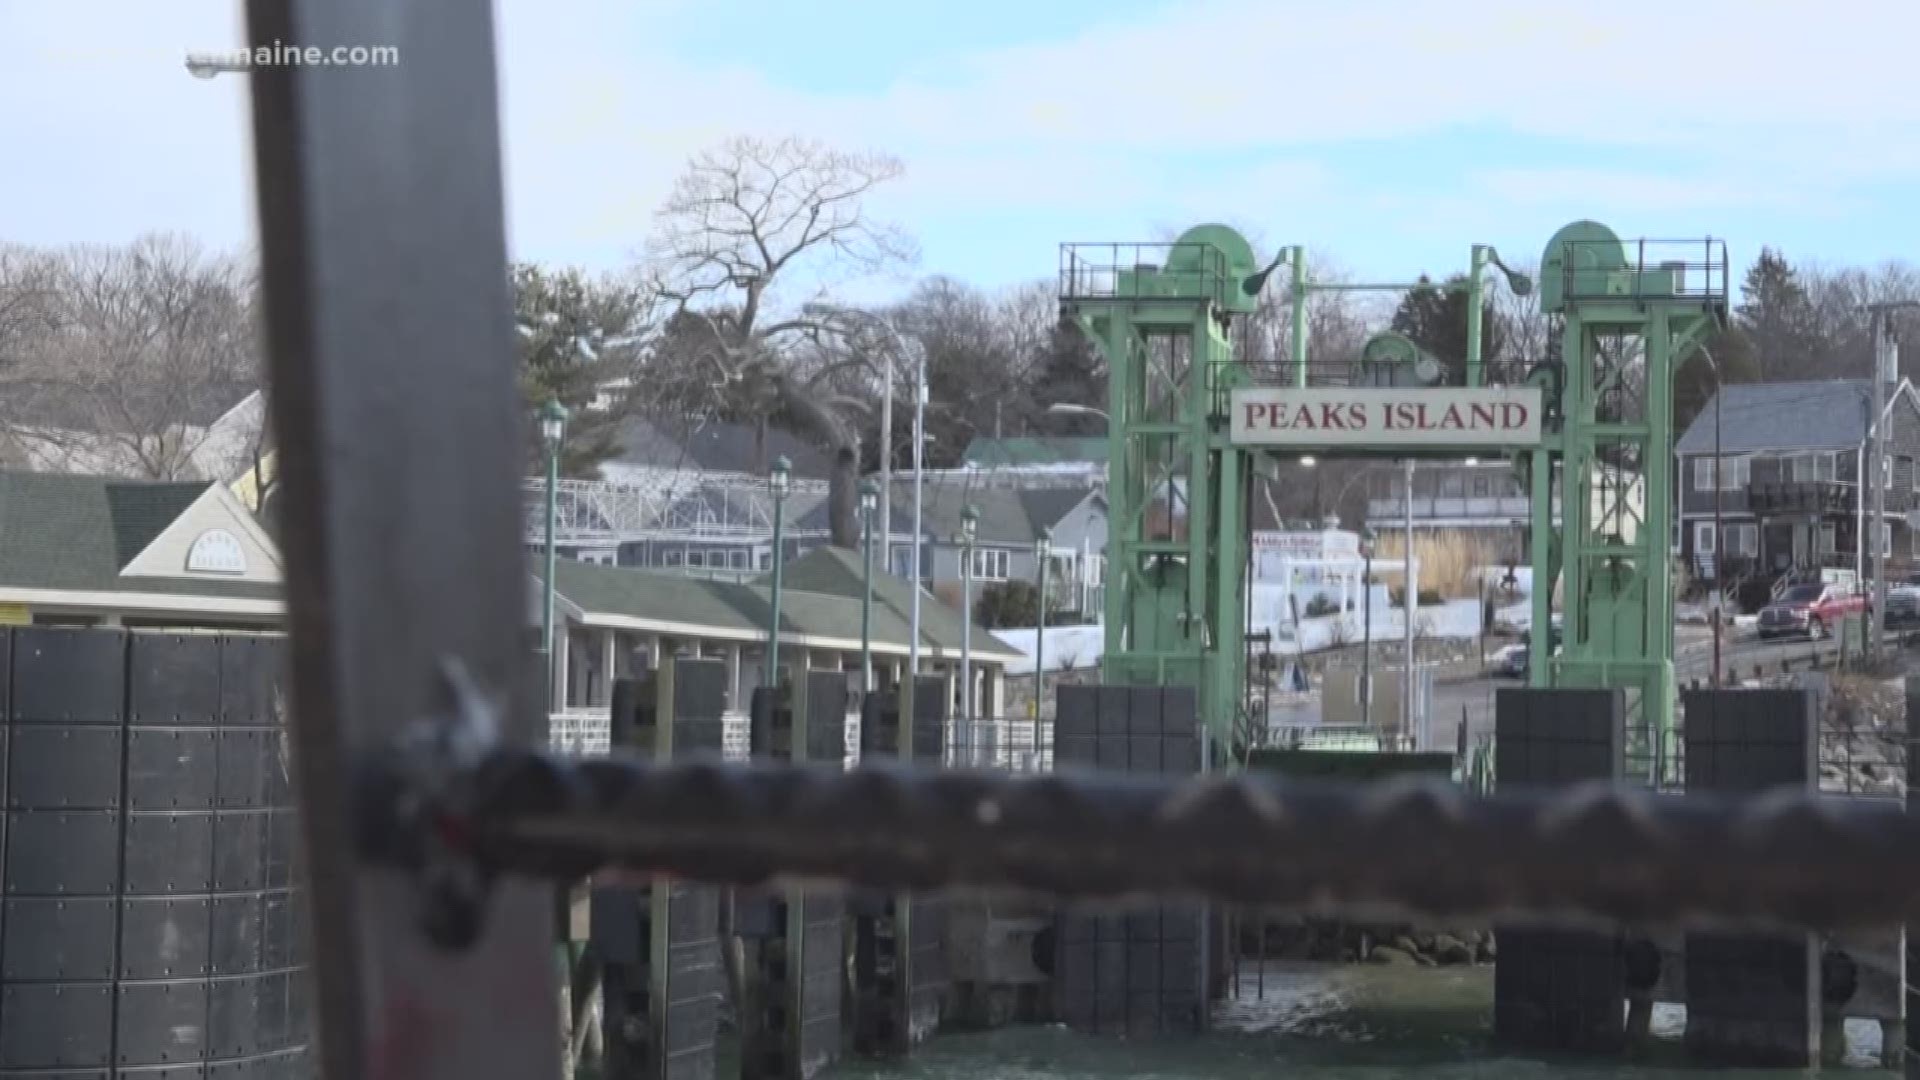 A new proposed ferry to Peaks Island could carry 200 more people -- but residents are afraid of overcrowding.